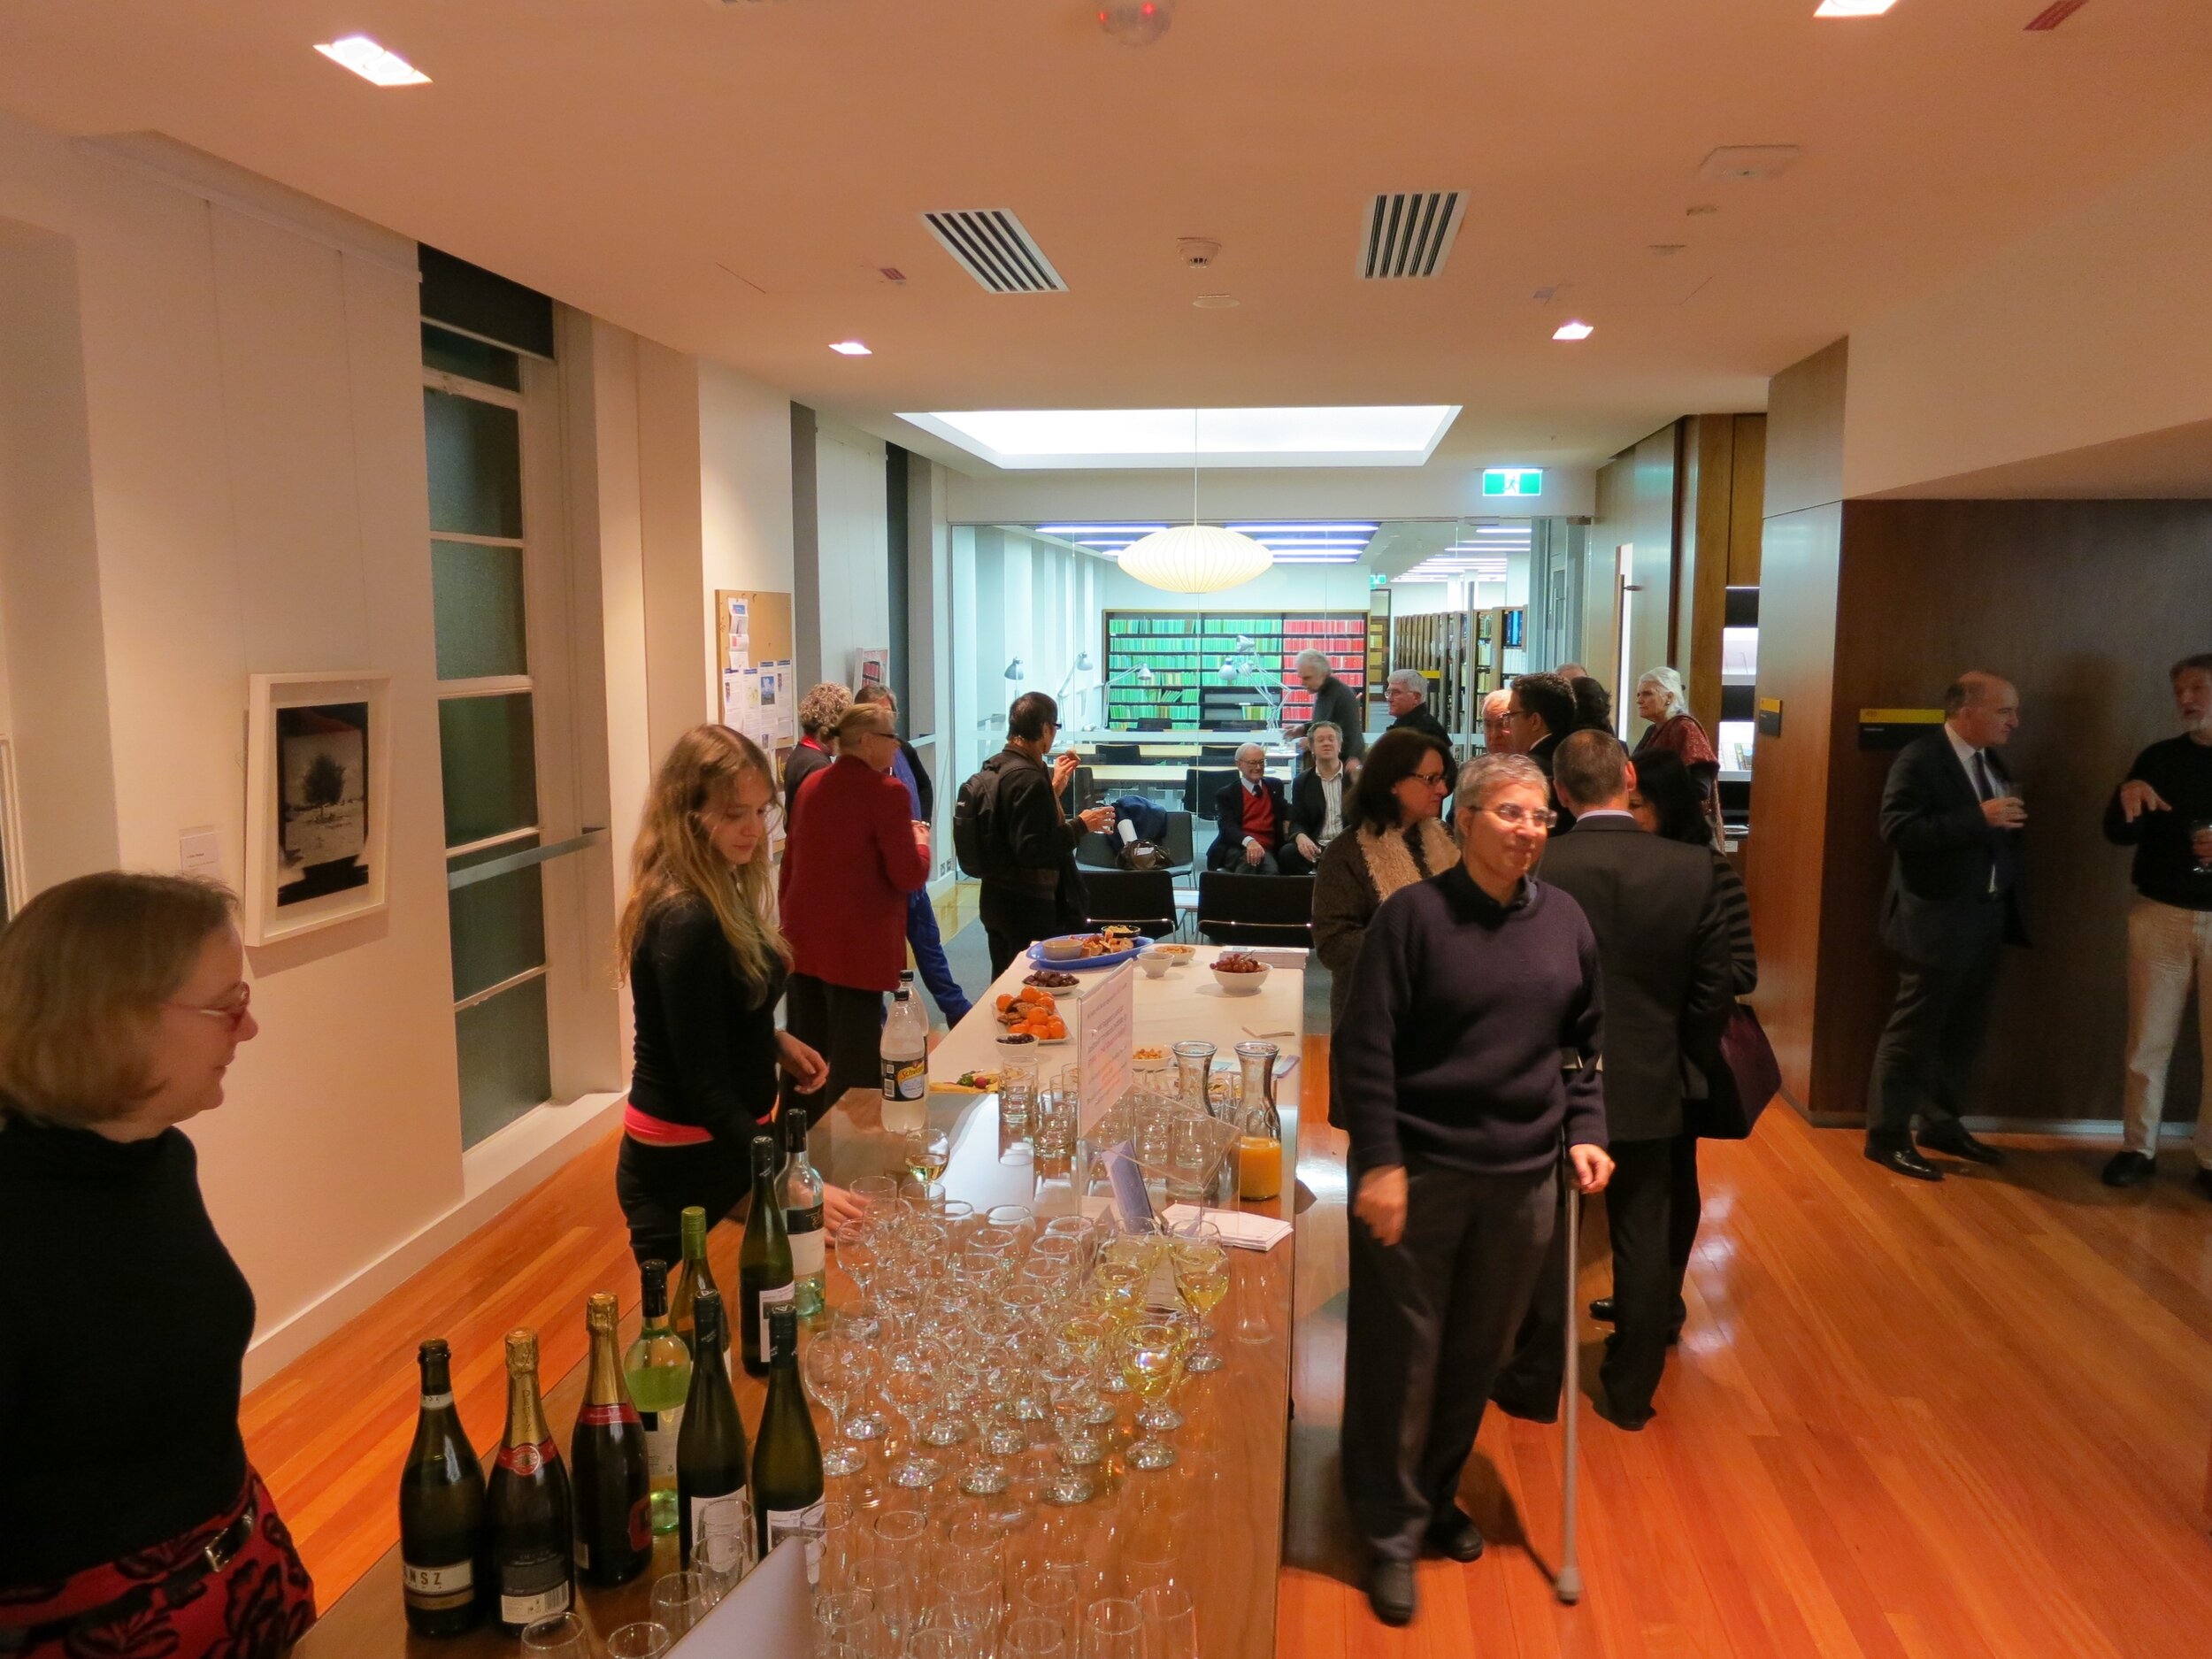  View of the opening of  Response to Cyprus,  10 July 2013, hosted by the Australian Archaeological Institute at Athens (AAIA) at the Centre of Classical and Near Eastern Studies of Australia (CCANESA). Work by  Jacky Redgate  shown on the left wall.